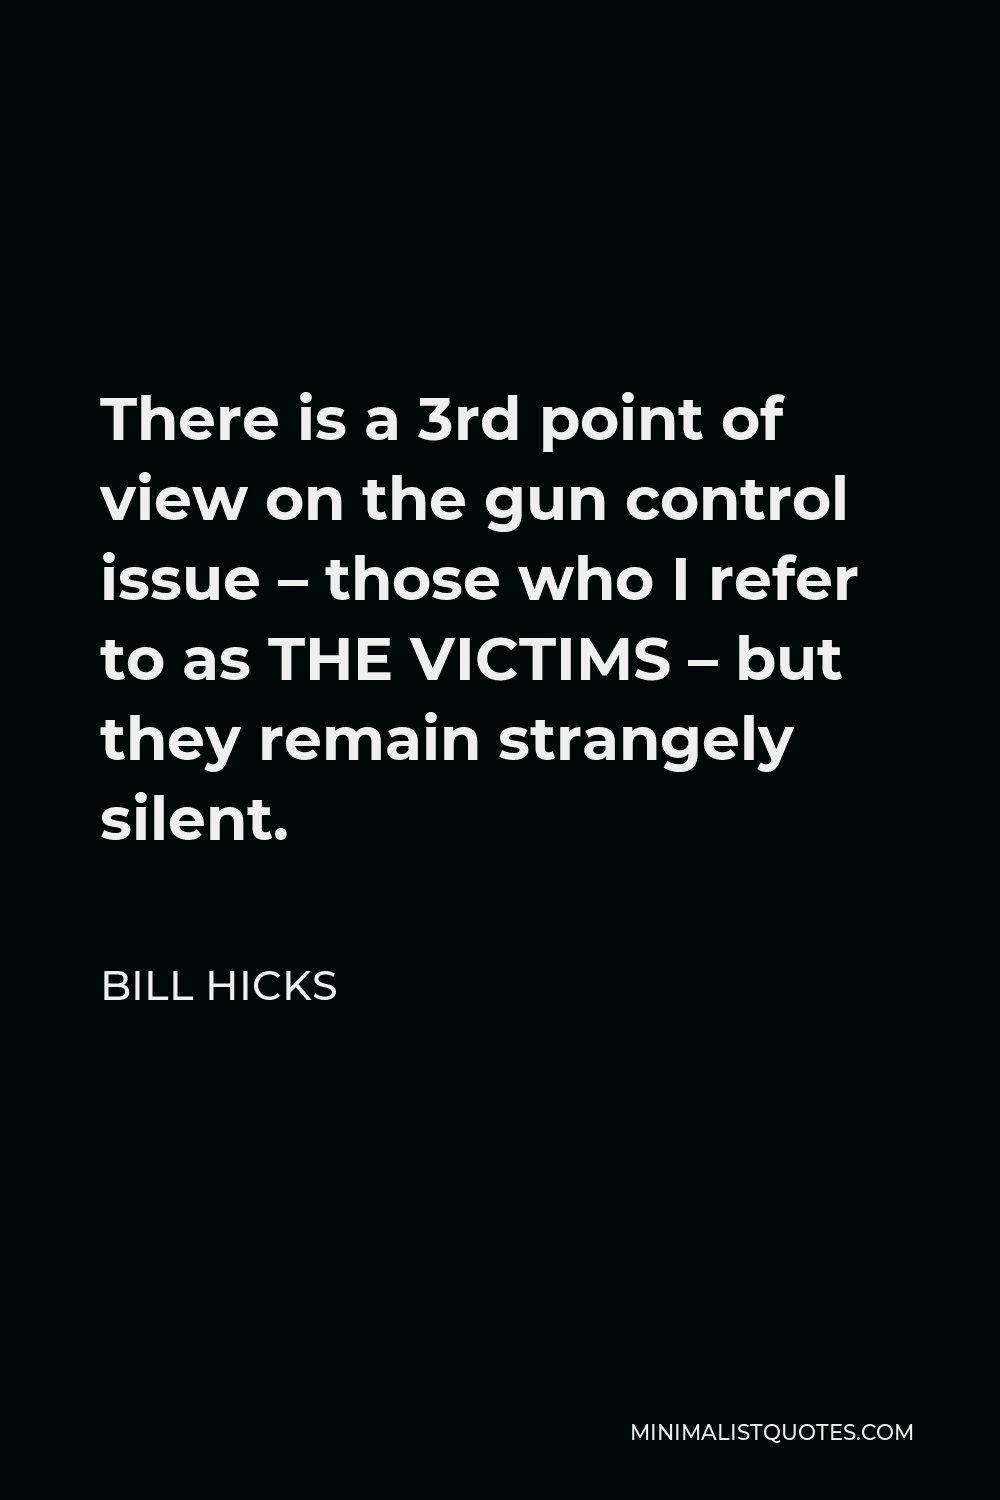 Bill Hicks Quote - There is a 3rd point of view on the gun control issue – those who I refer to as THE VICTIMS – but they remain strangely silent.